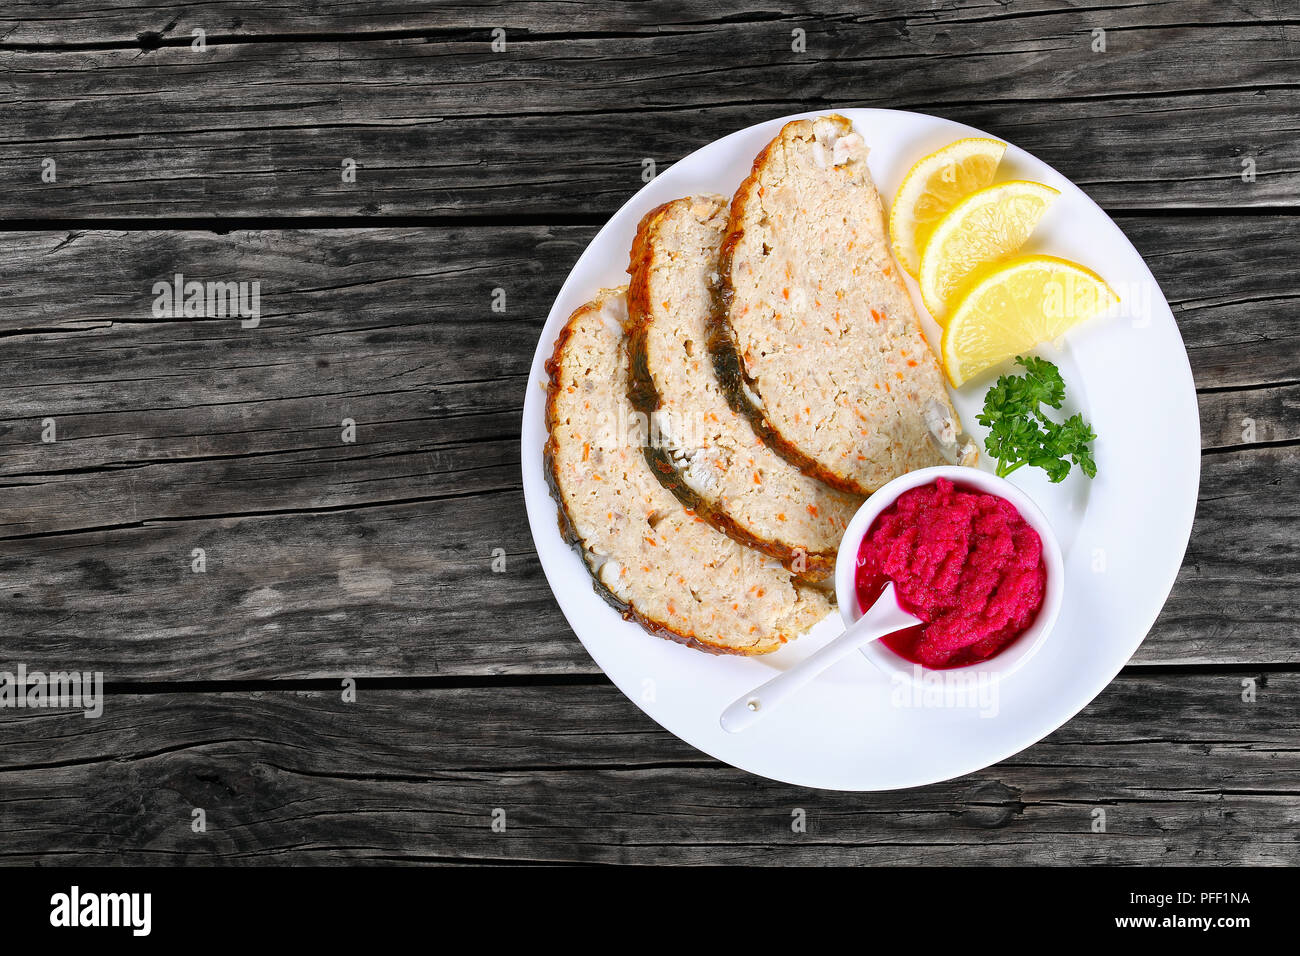 Jewish whitefish or minced-fish forcemeat stuffed inside the fish skin, cut in slices and served  with lemon slices and horseradish flavored with beet Stock Photo